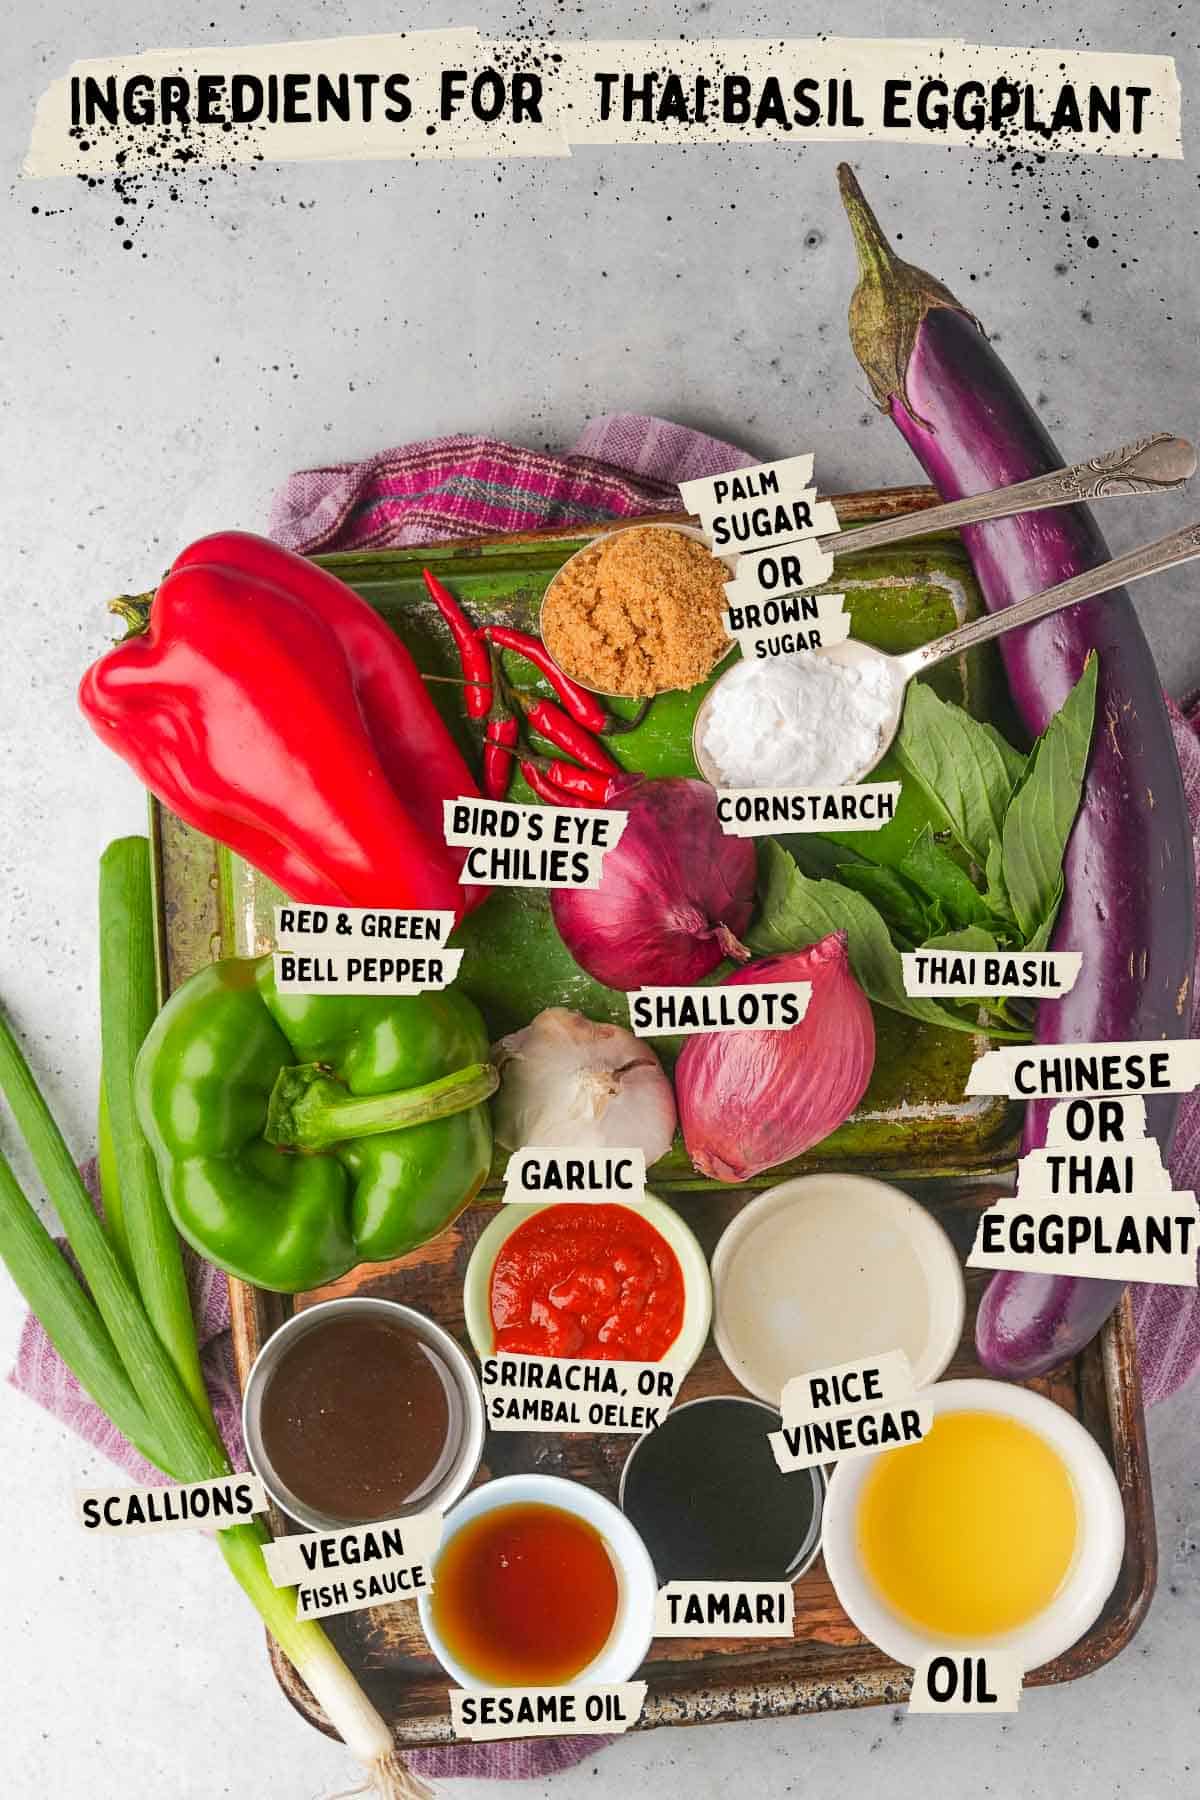 Ingredients for Thai basil eggplant on a metal tray.